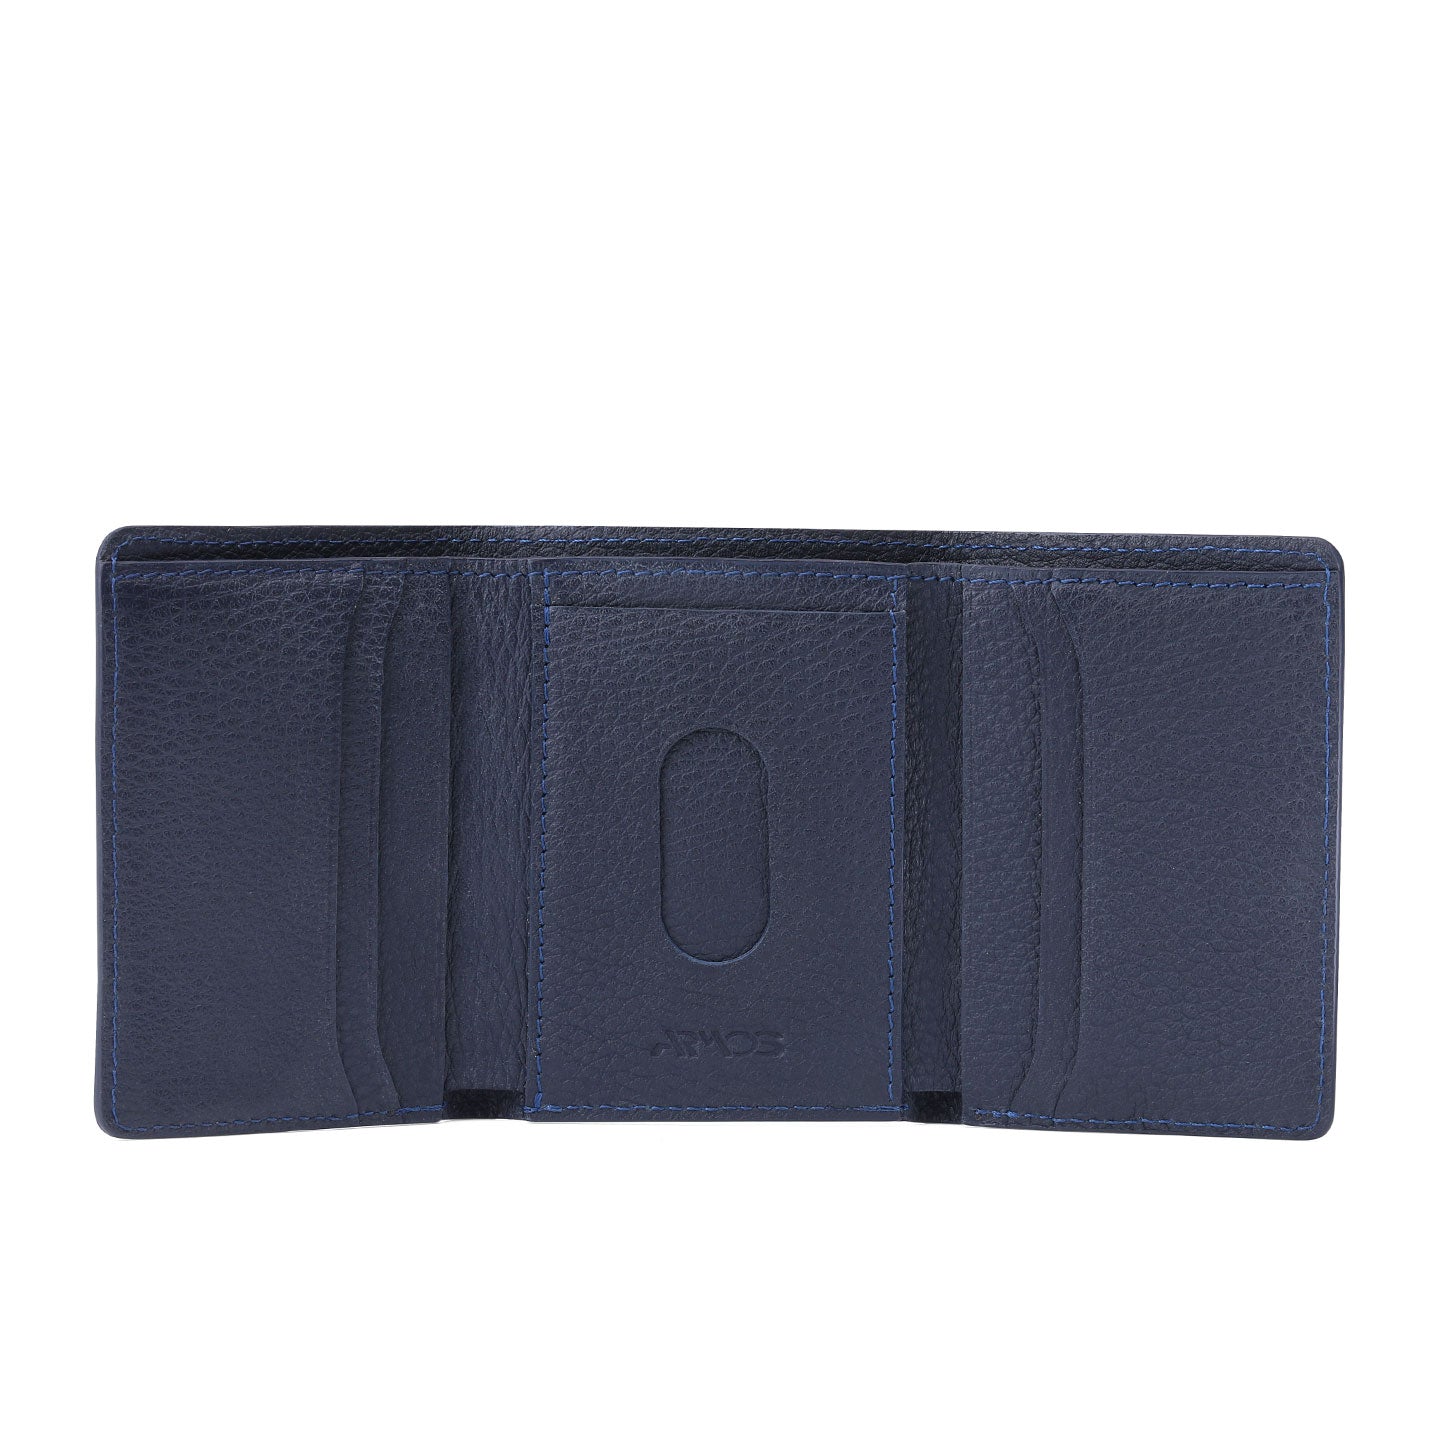 Wallet with triple fold